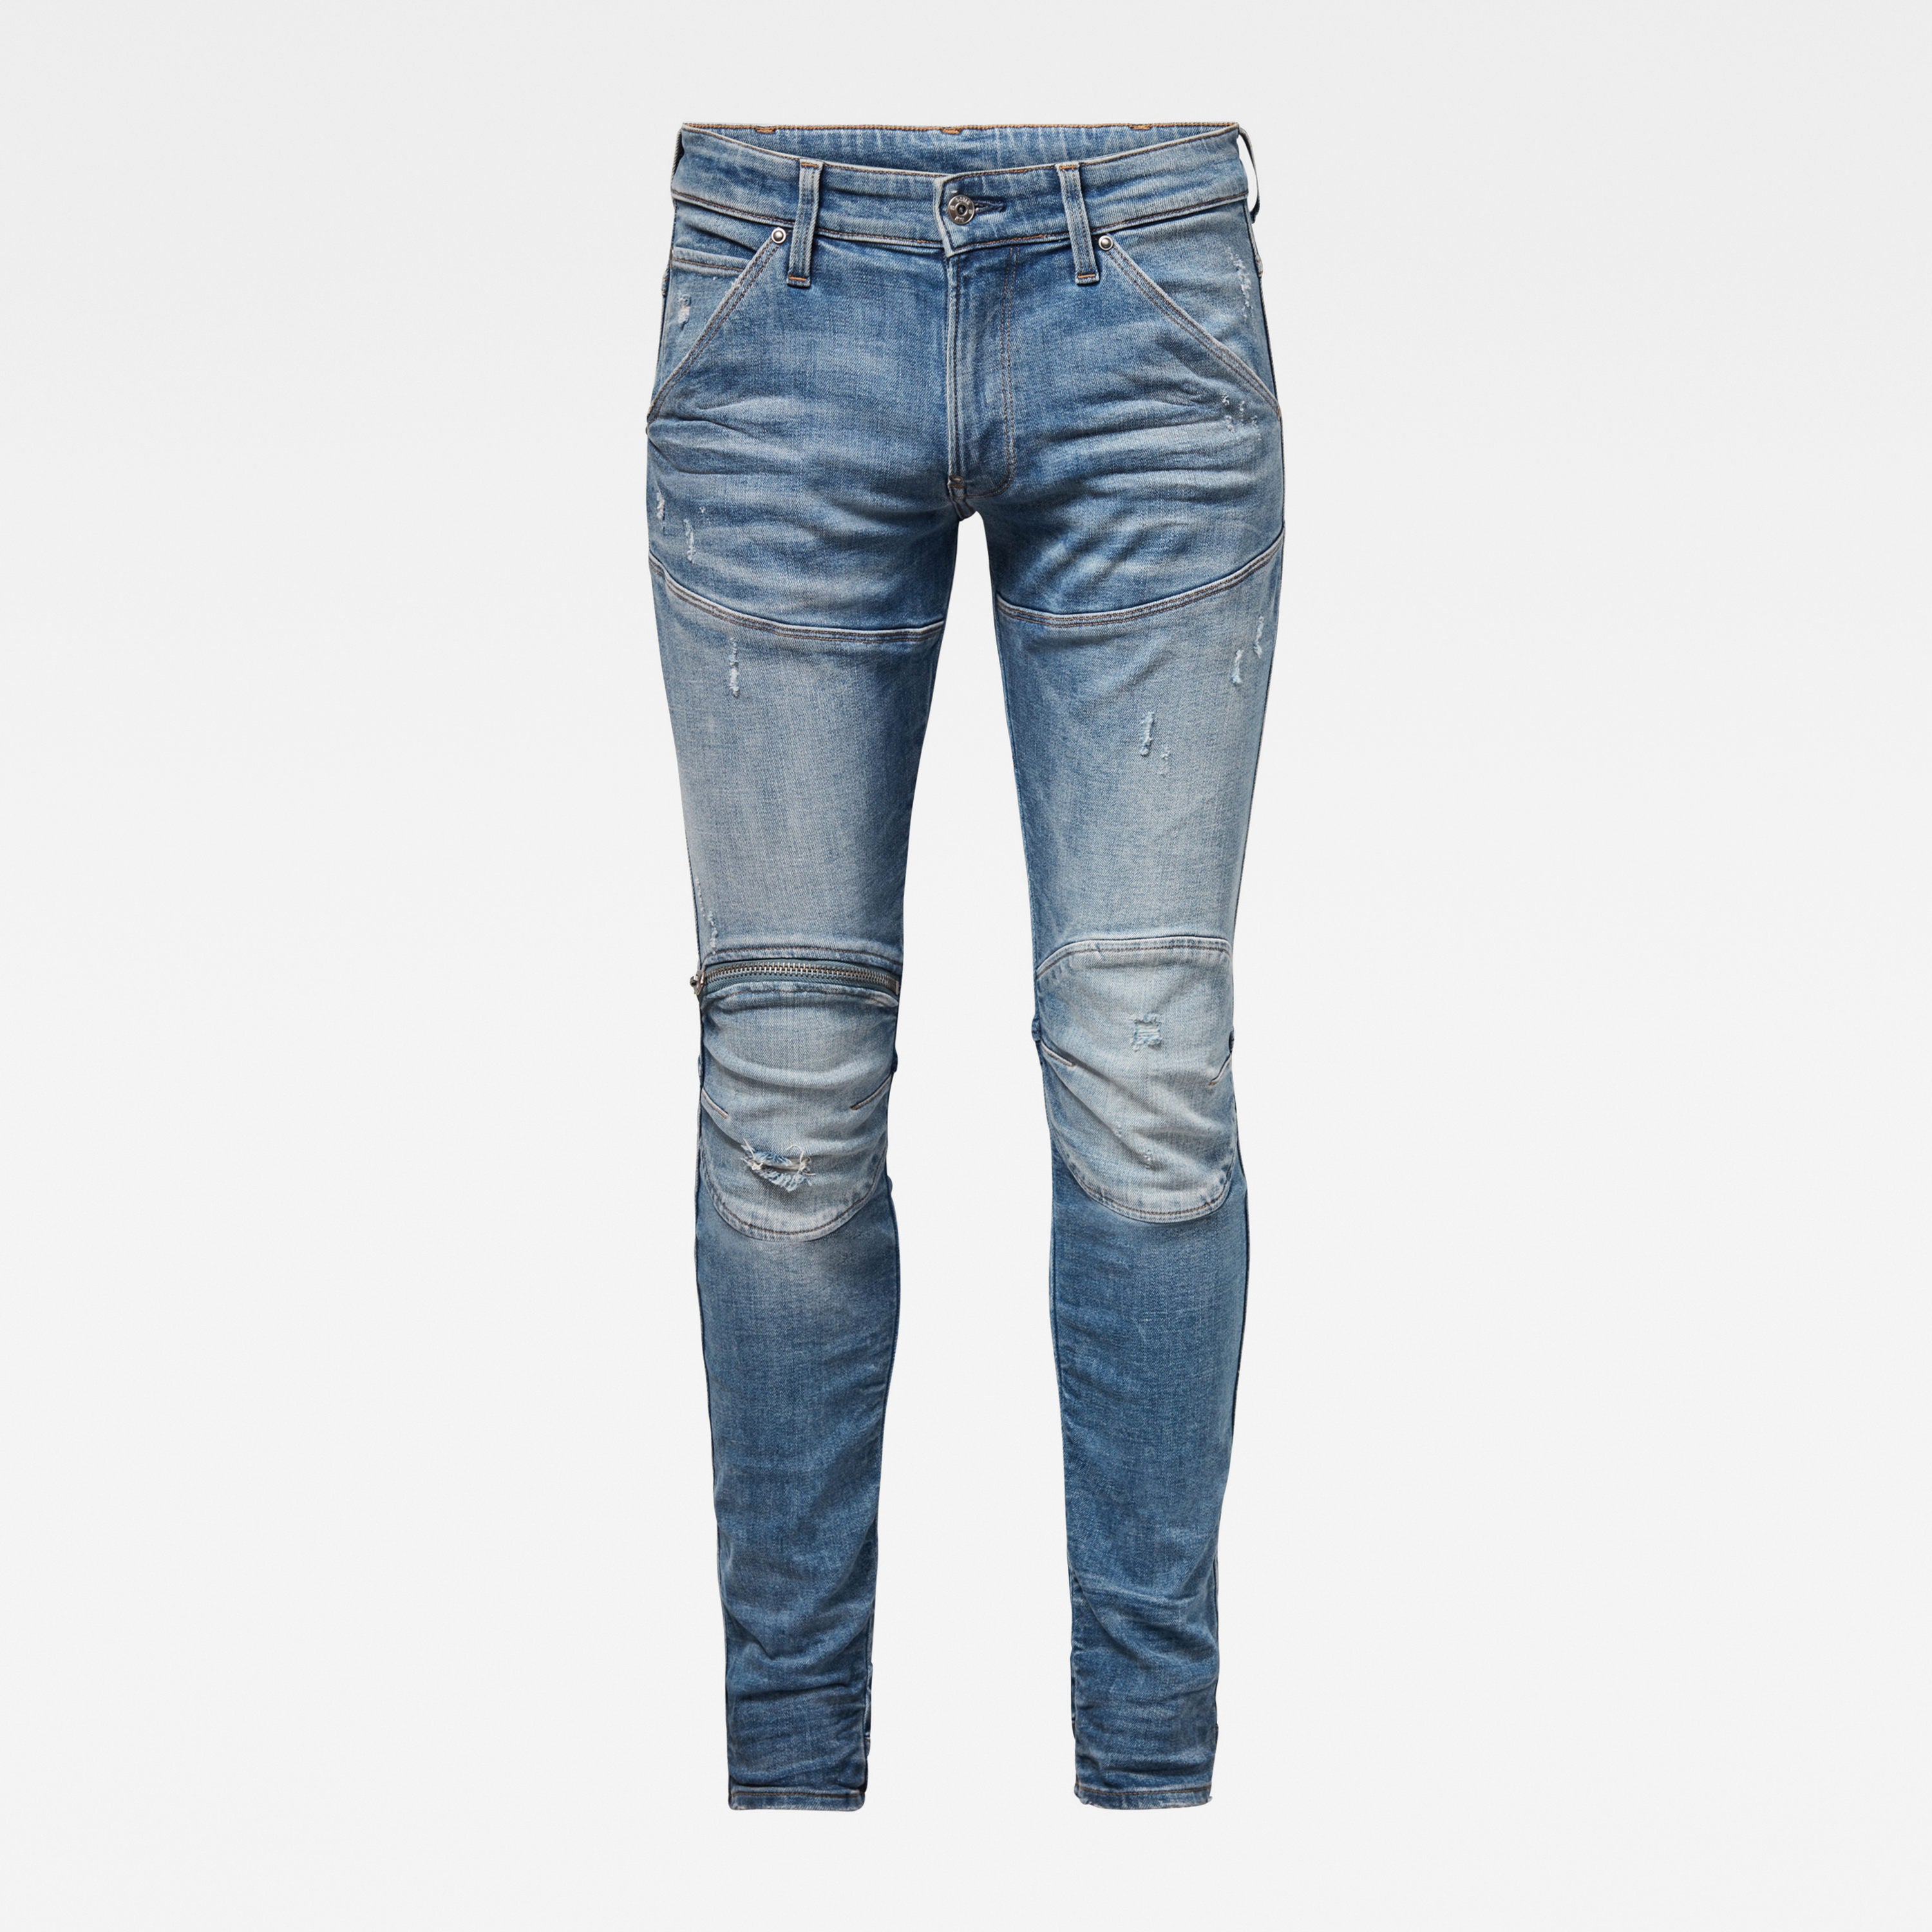 The Best Places To Buy Jeans Online: Find Your New Favorite Jeans